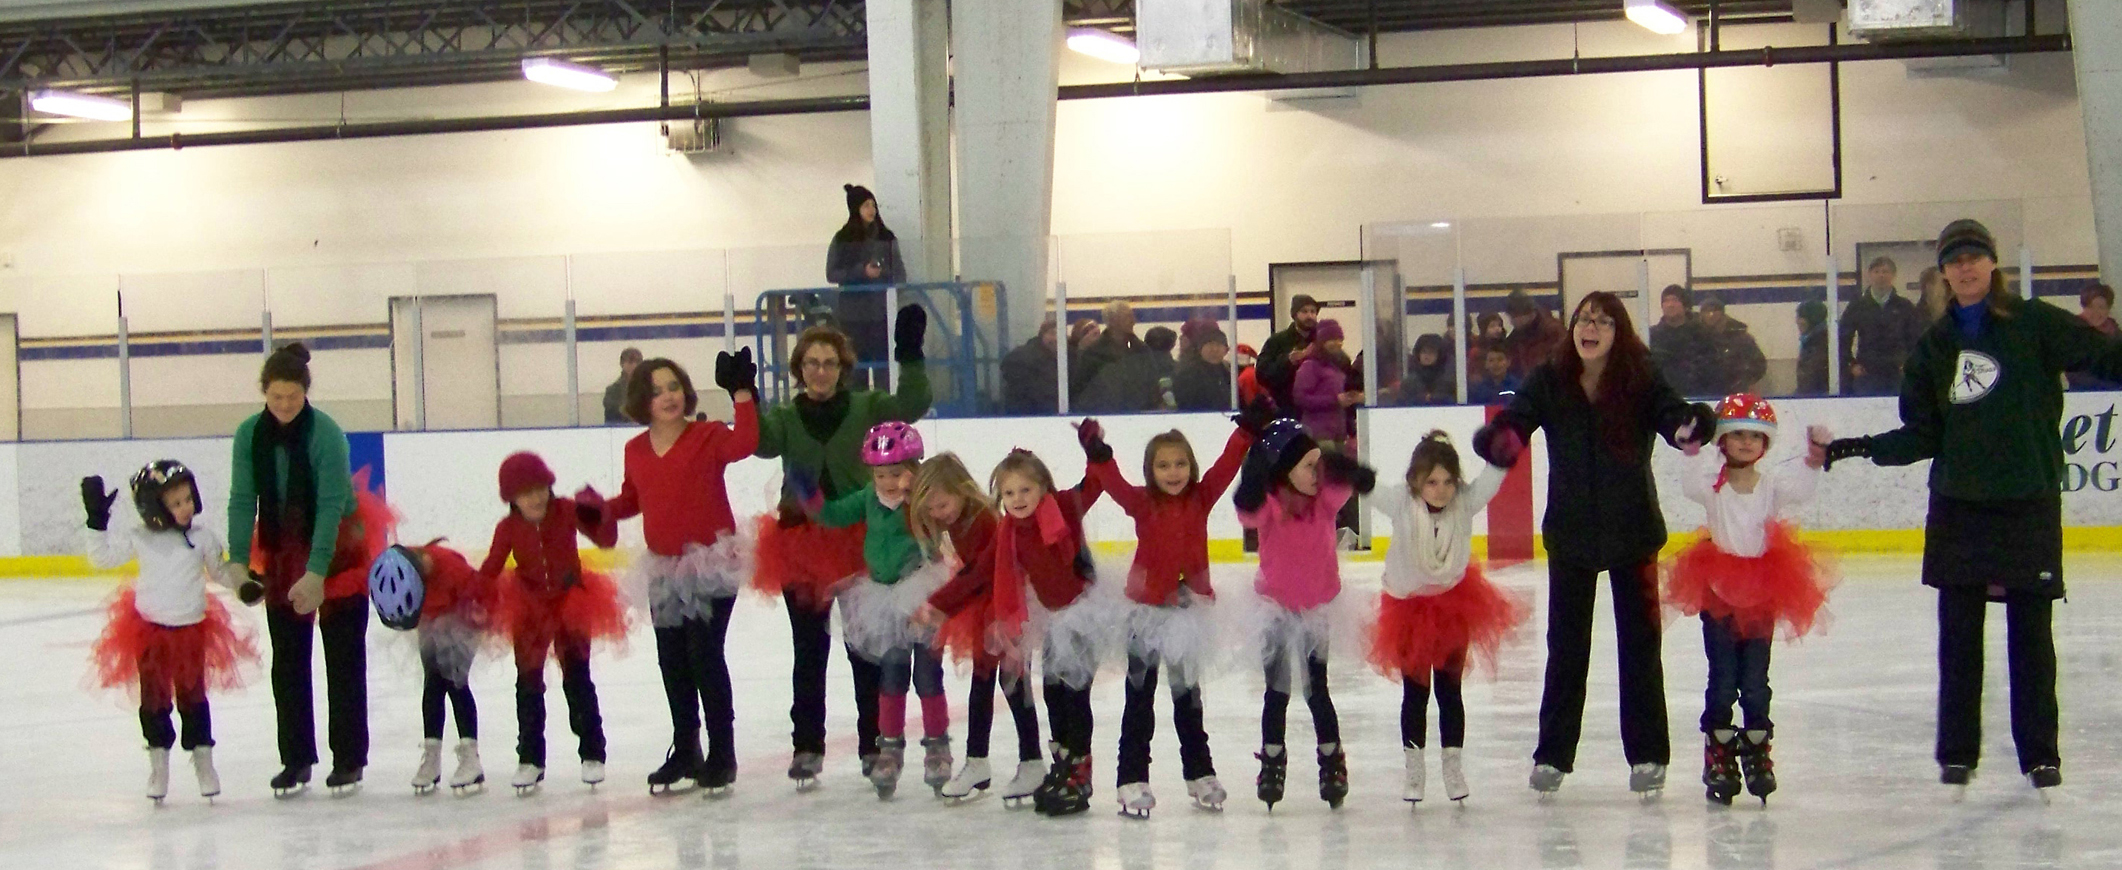 Figure skaters take a bow before cheering fans during a December 2013 event at the Kevin Bell Arena. From left: Madilyn Illg, Cara Clemens, Sylvia Clemens, Thea James, Tianah Cavanaugh, Rhonda Velsko, Sabre Wilmeth, Keagan Niebuhr, Natalia Sherwood, Natalie Farren, Courtney Galloway, Evelyn Sherwood, coach: Natalie Betley, Mia Hemphill, assistant: Priscilla Andrade.-Photo by McKibben Jackinsky, Homer News